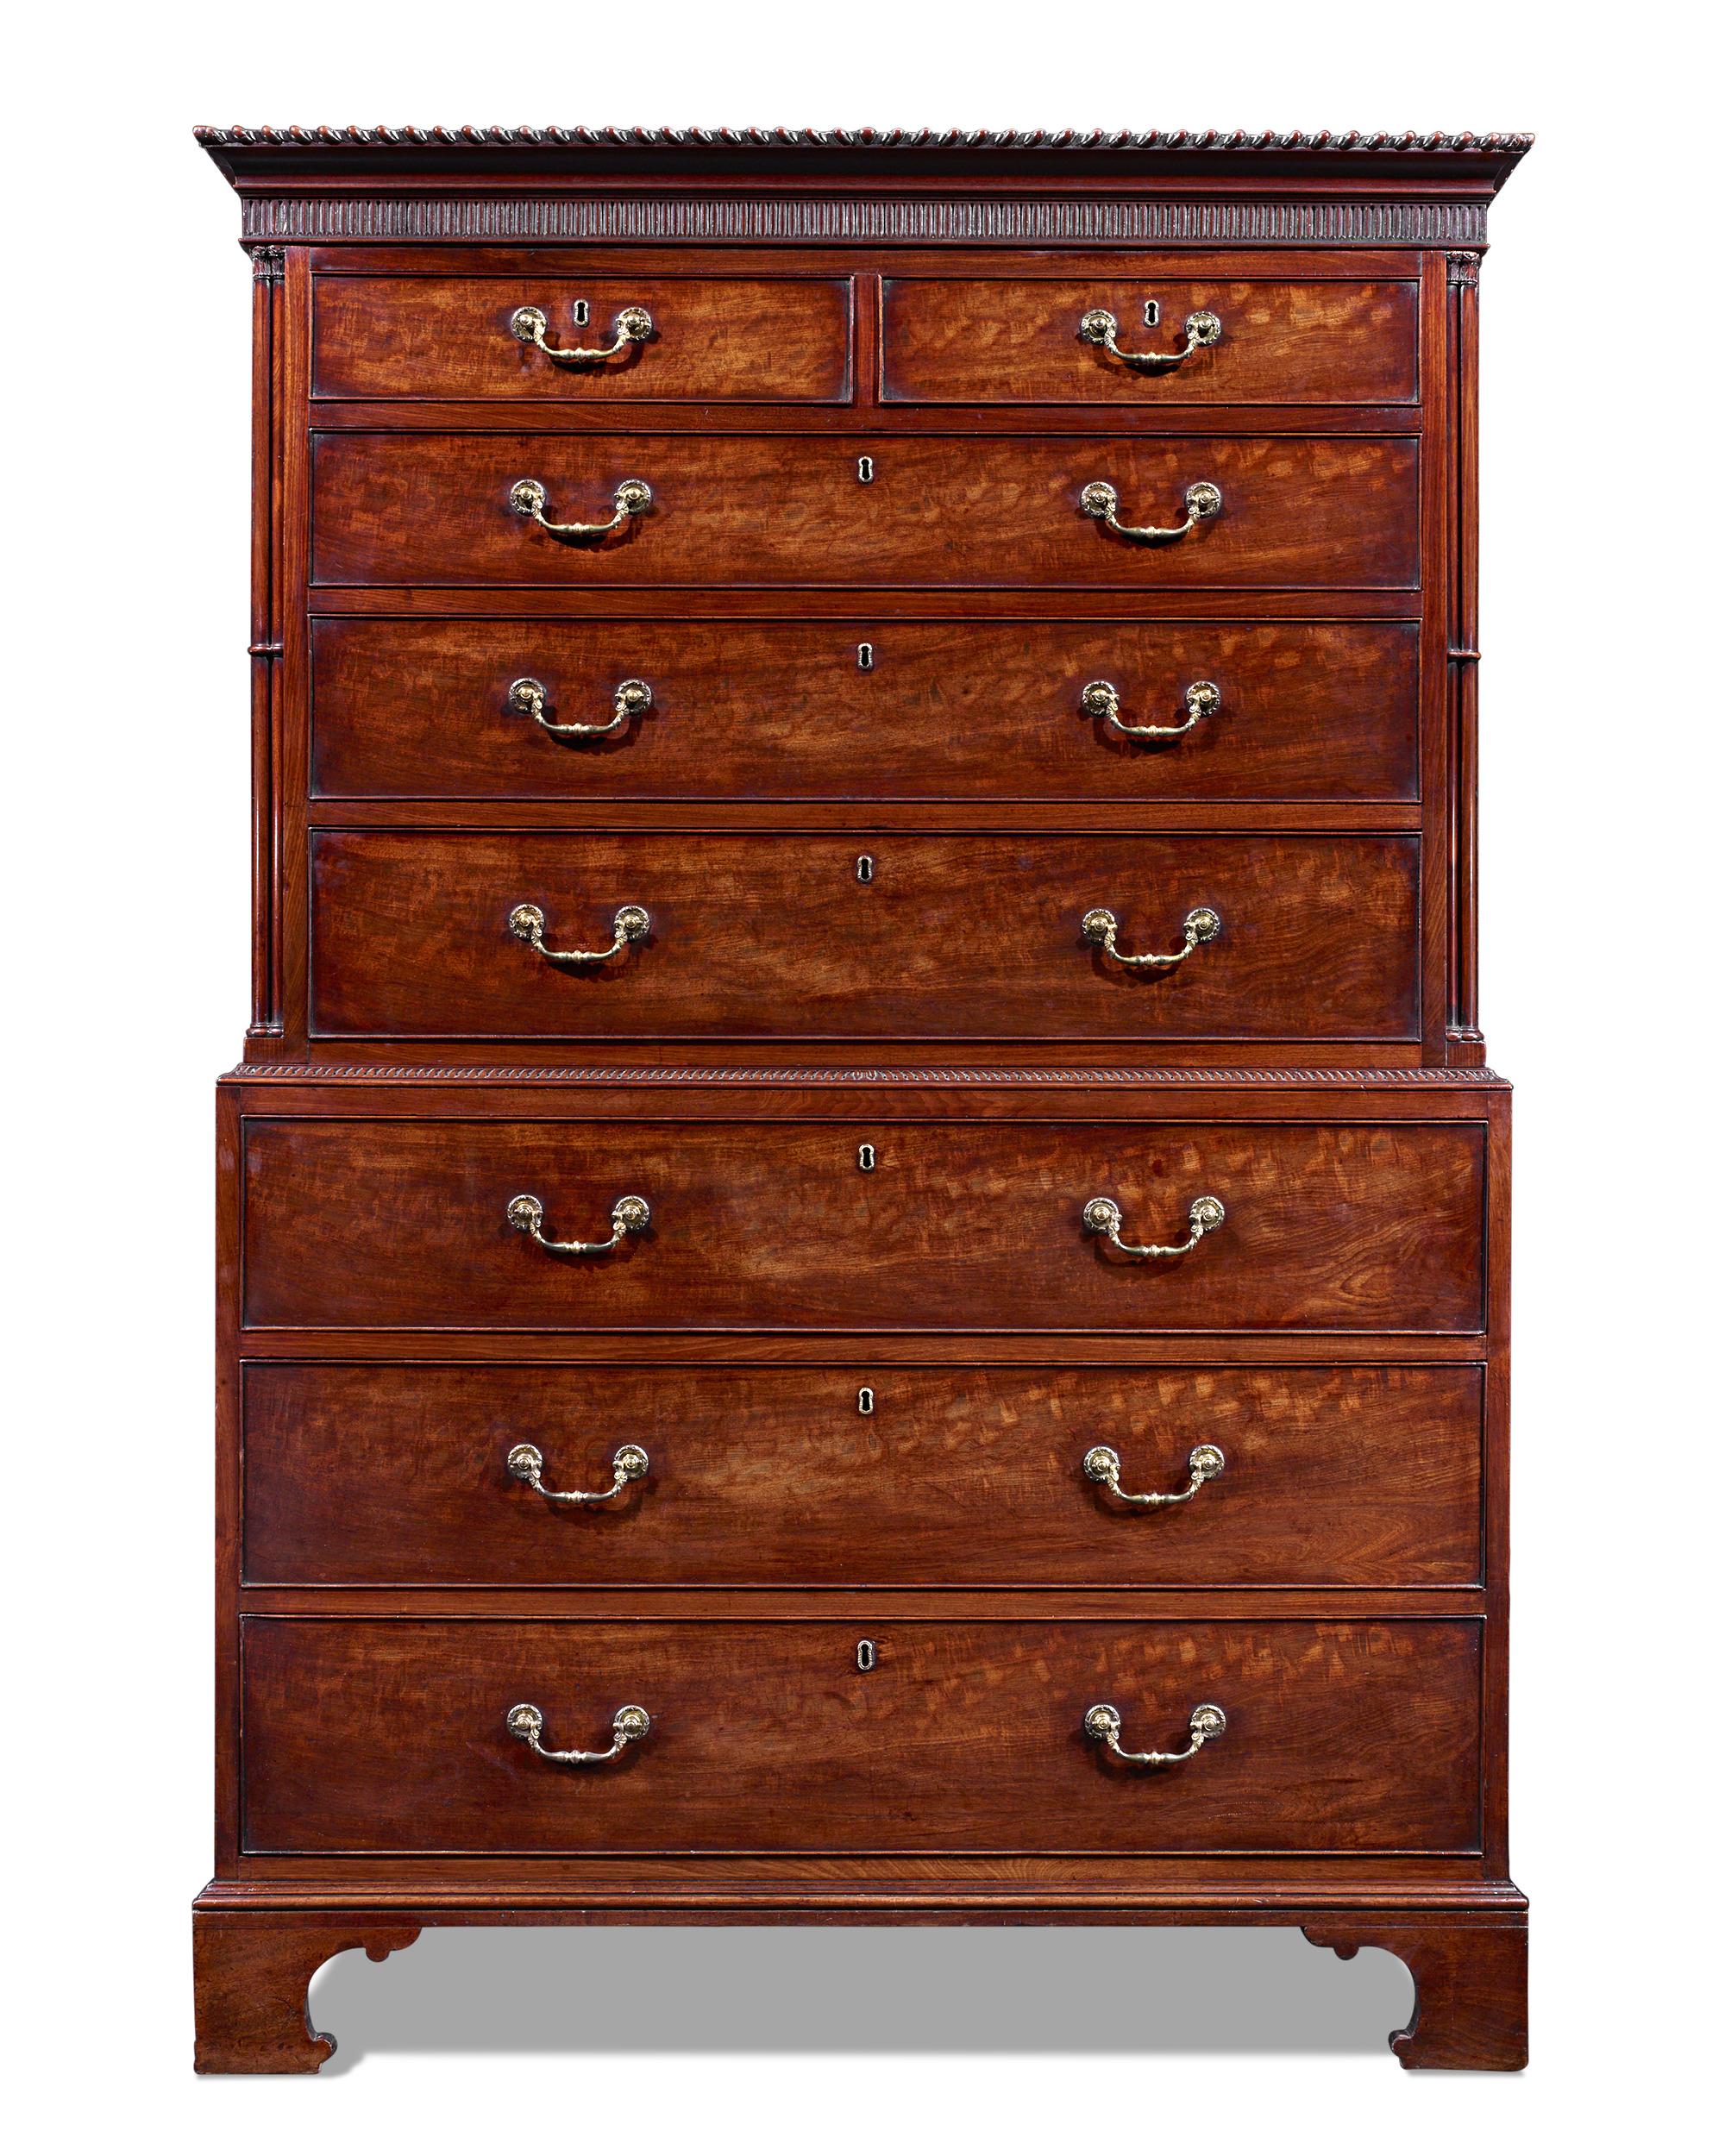 This monumental chest-on-chest exemplifies Thomas Chippendale’s signature style, highlighting the meticulous craftsmanship and neoclassical elements that have become synonymous with his name. An undeniable triumph, this cabinet attributed to the